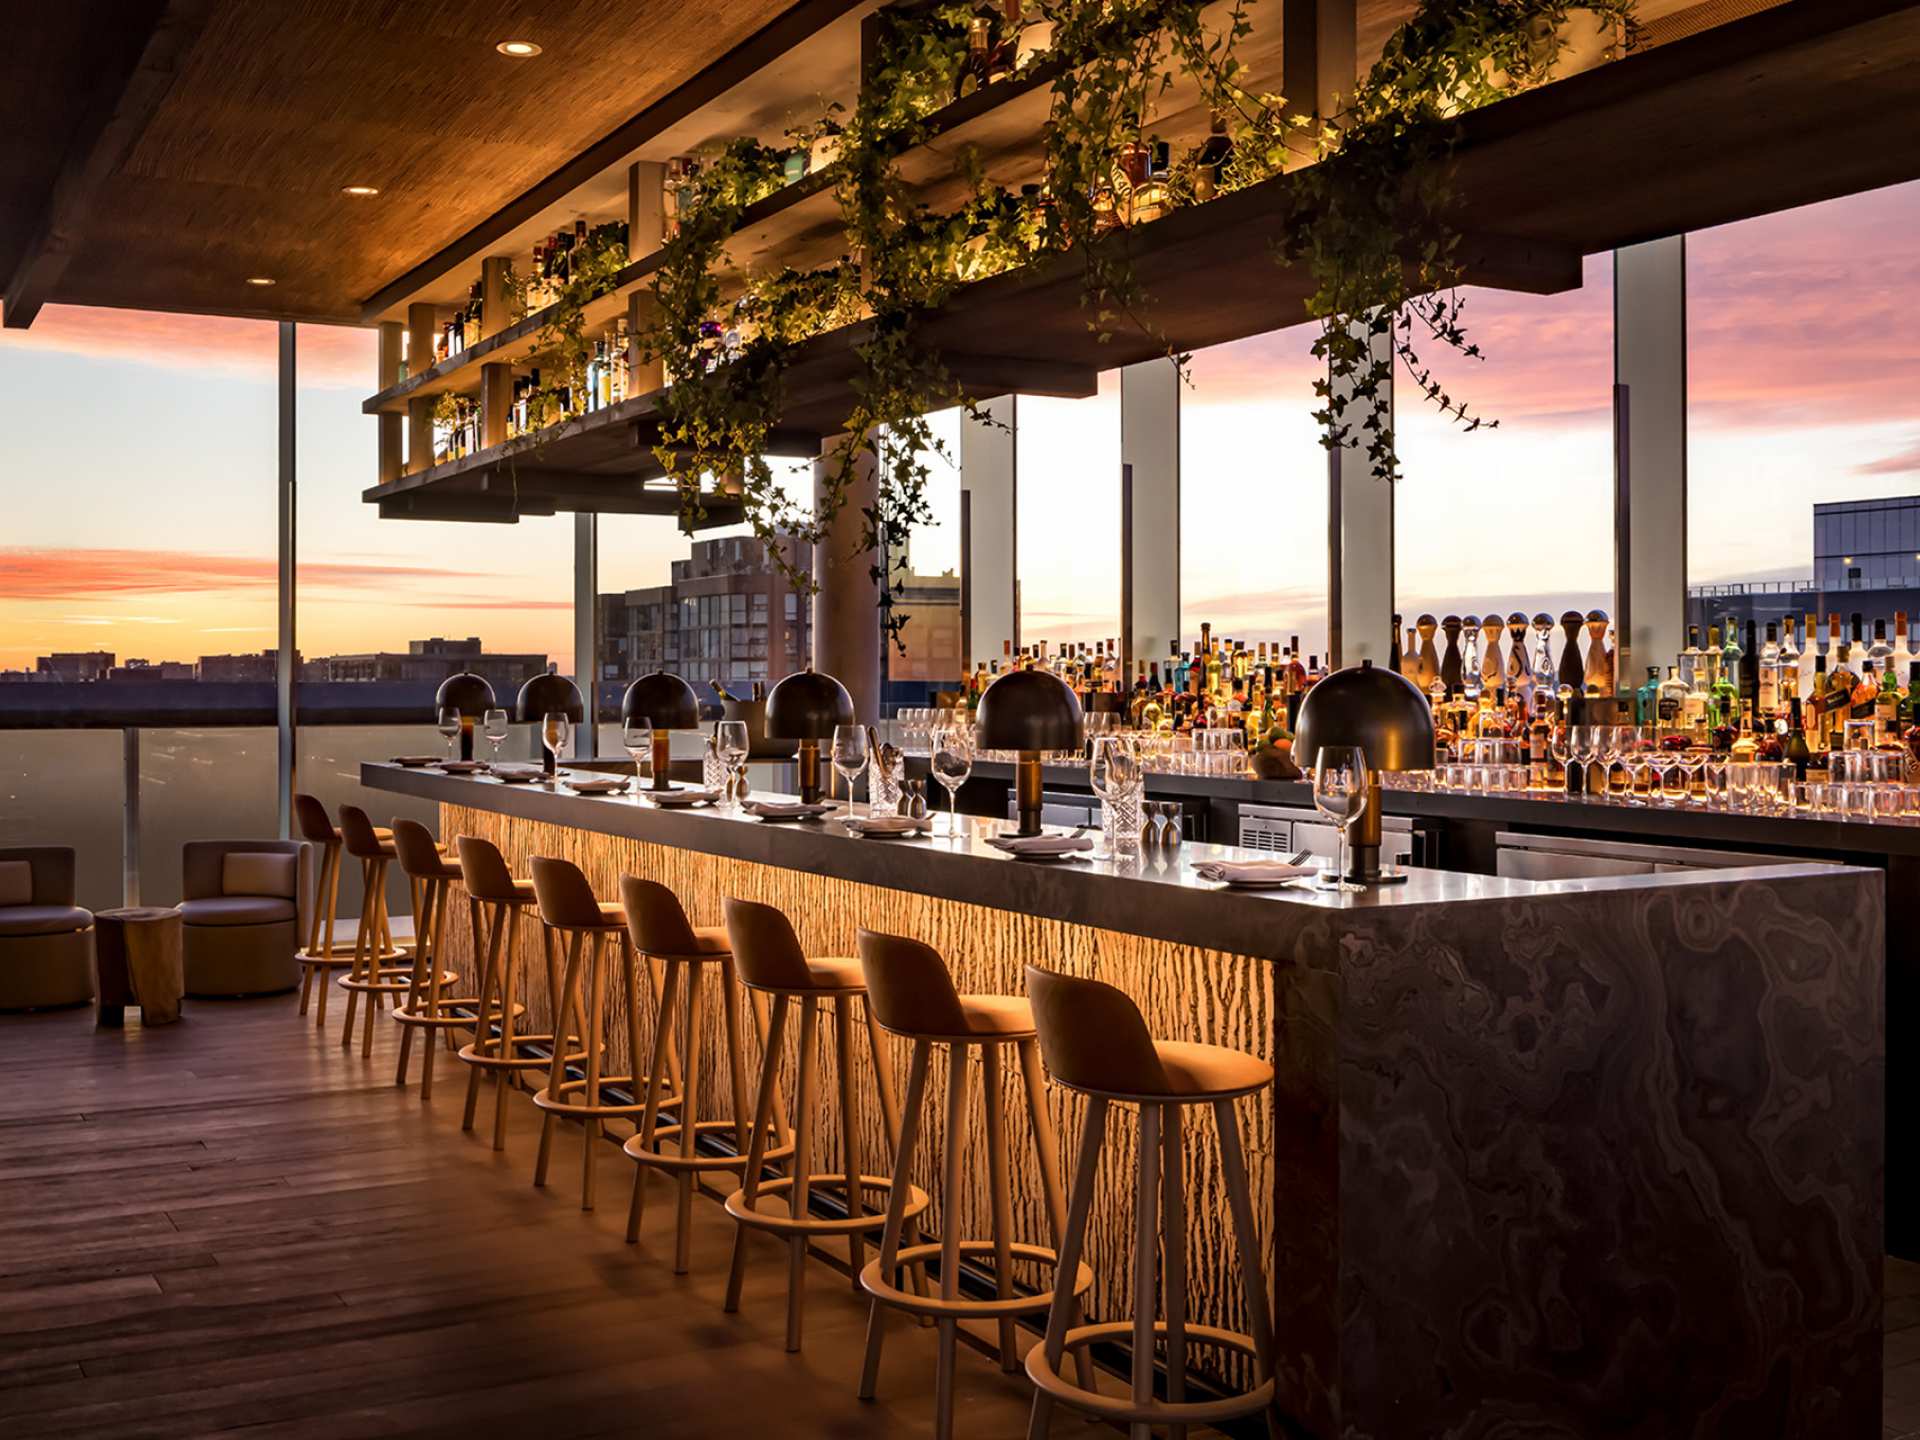 Best patios in Toronto | The bar at Harriet's rooftop at 1 Hotel Toronto